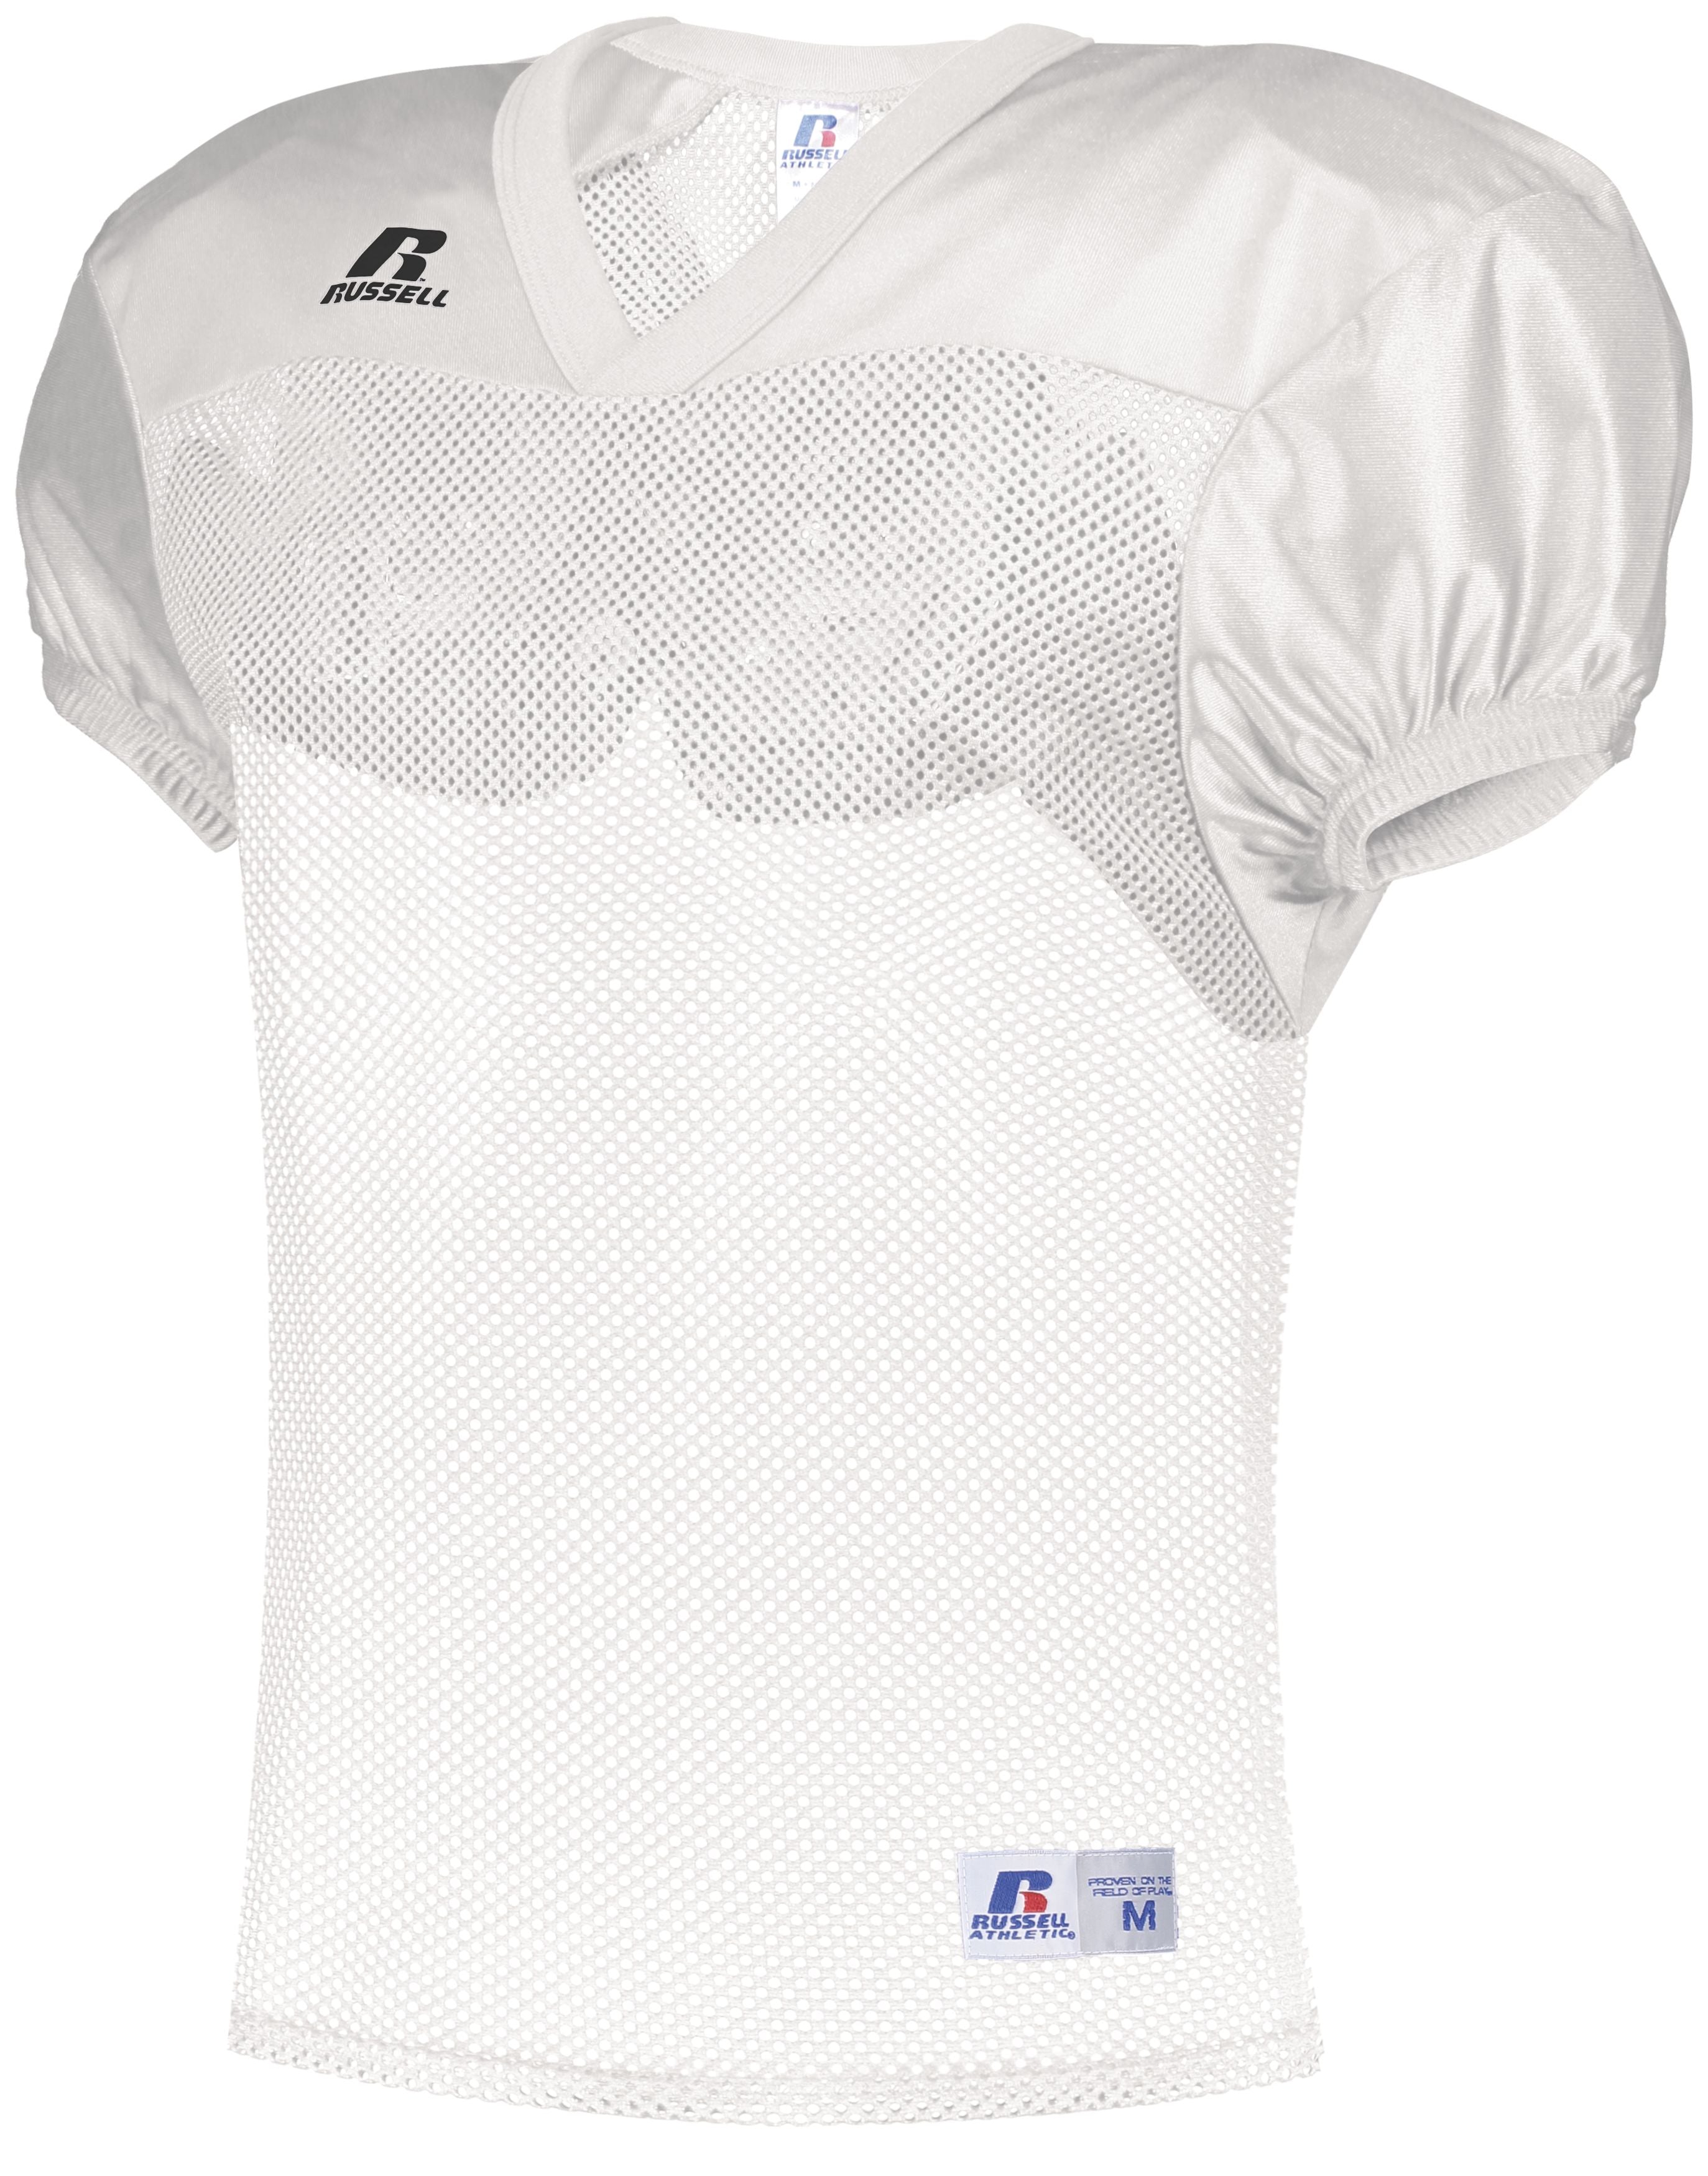 Russell Athletic Youth Stock Practice Jersey in White  -Part of the Youth, Youth-Jersey, Football, Russell-Athletic-Products, Shirts, All-Sports, All-Sports-1 product lines at KanaleyCreations.com